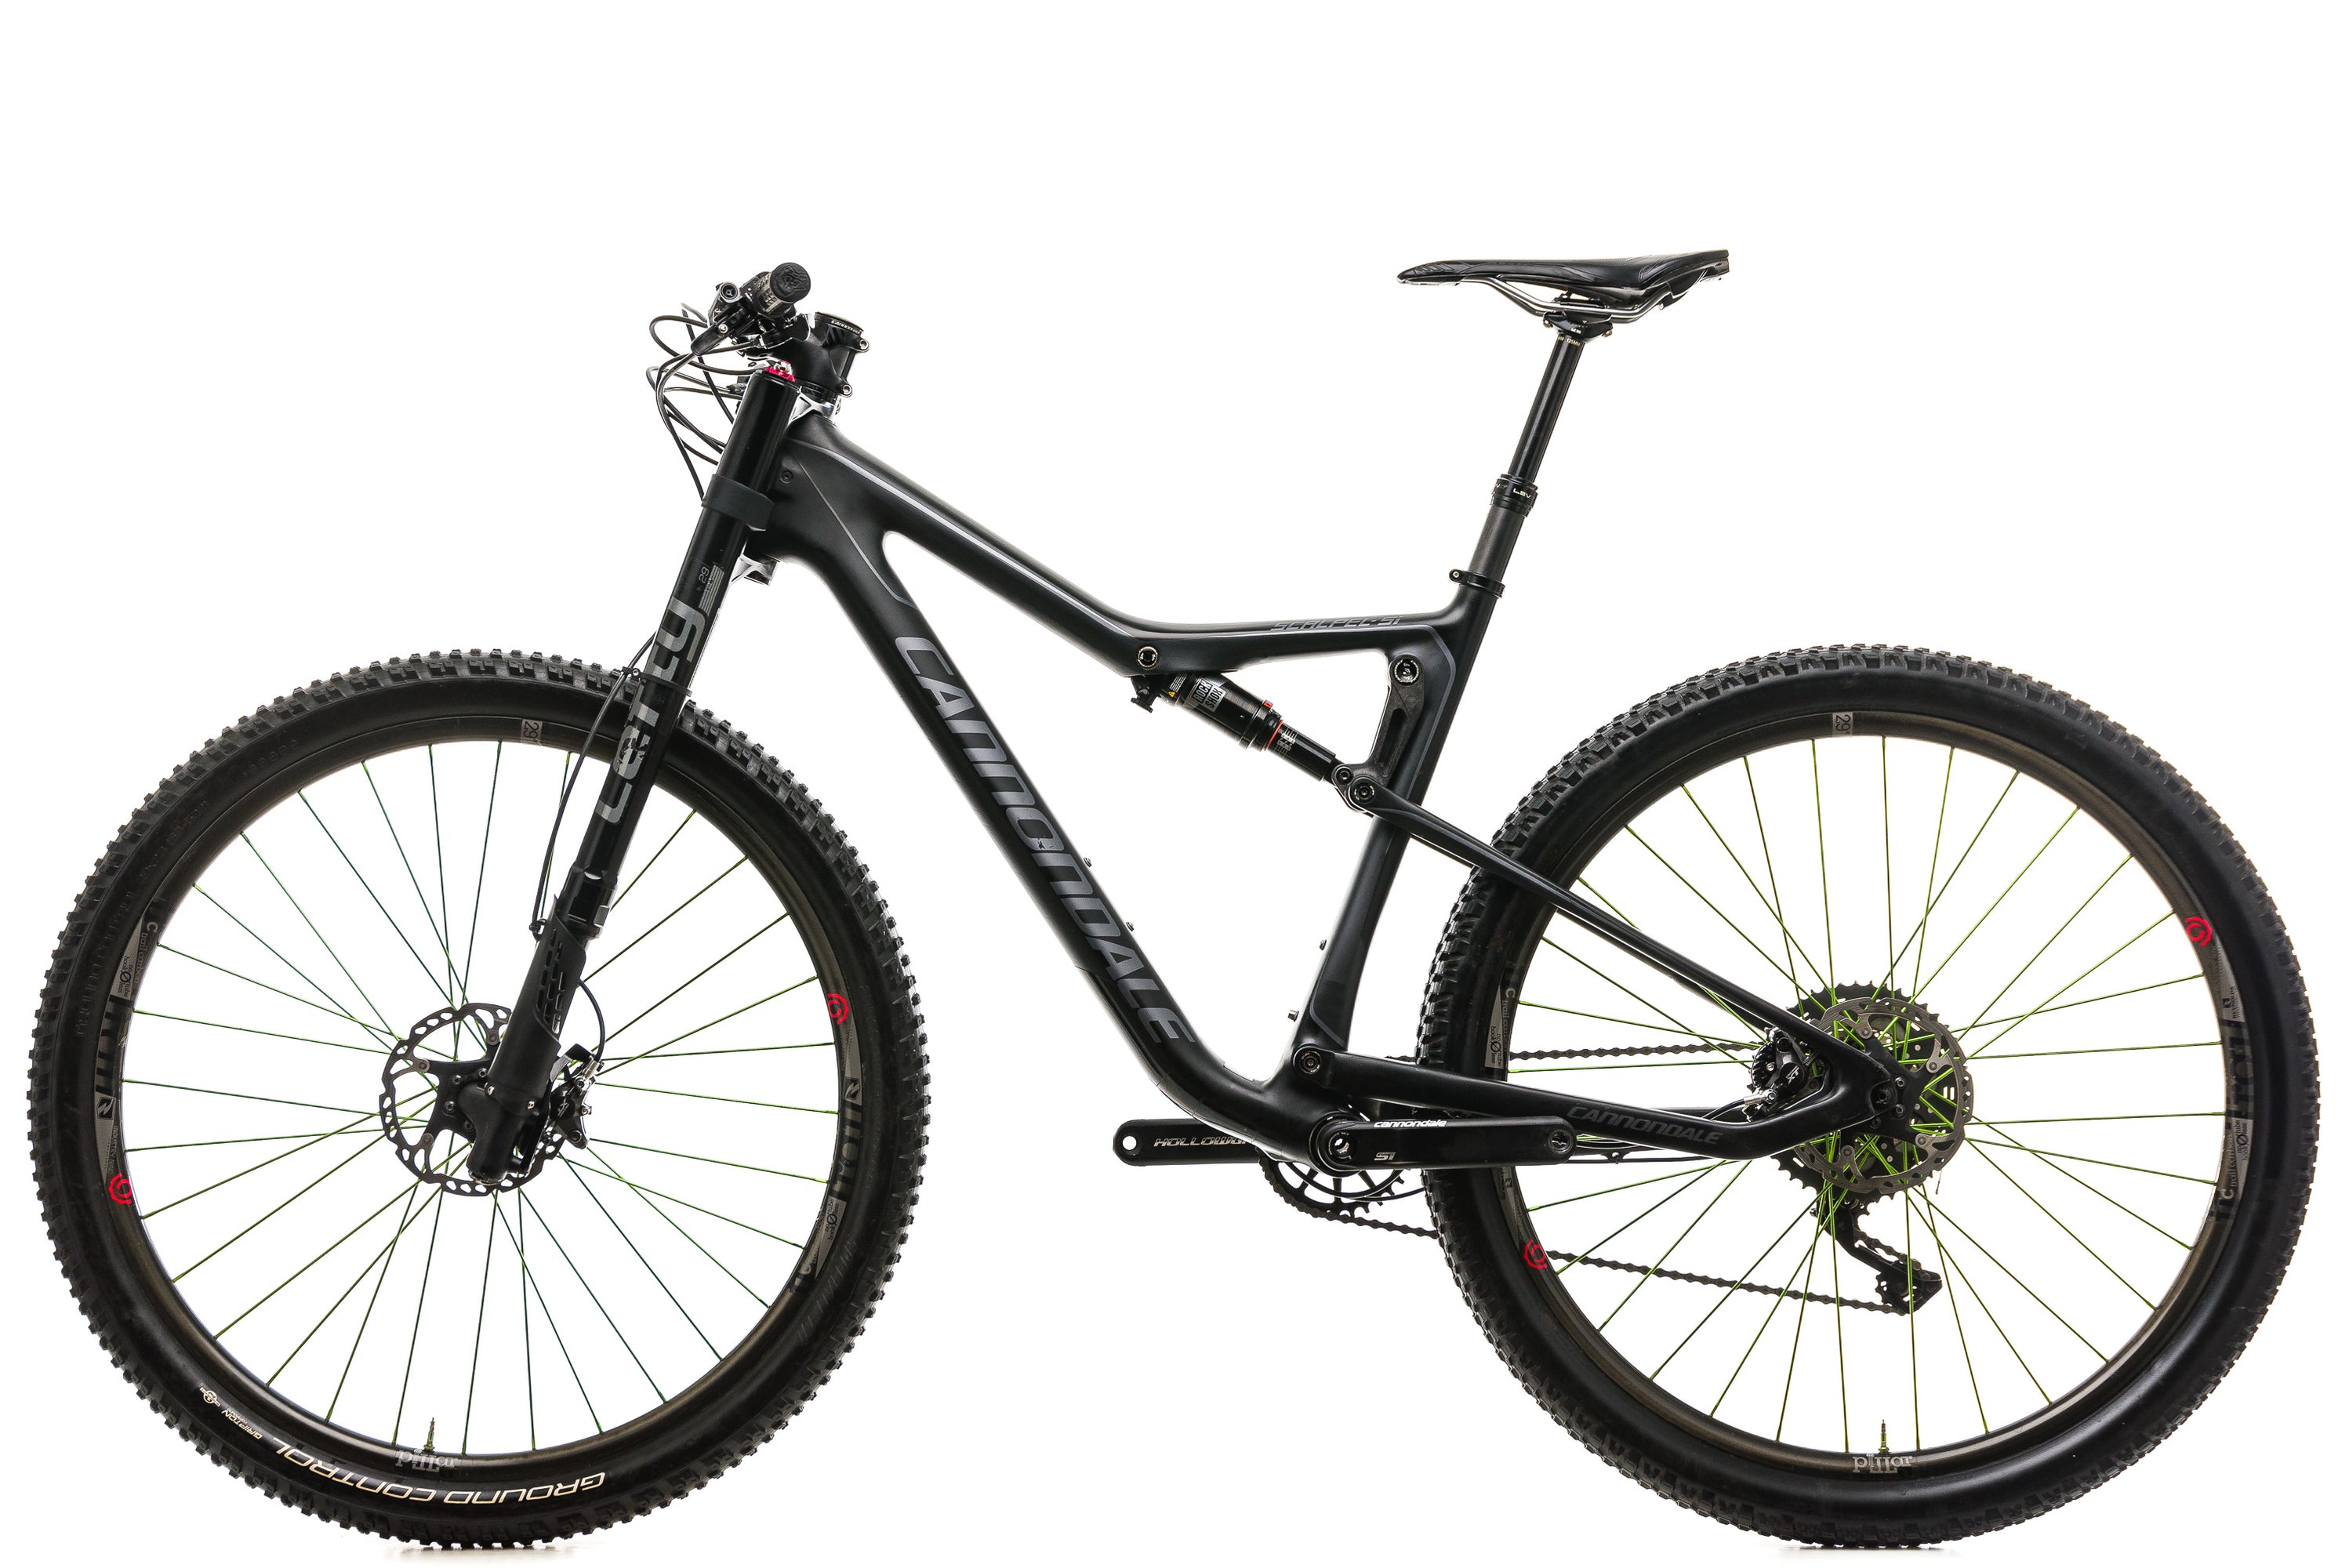 Cannondale Scalpel-Si Carbon 3 Mountain Bike - 2017, Large non-drive side